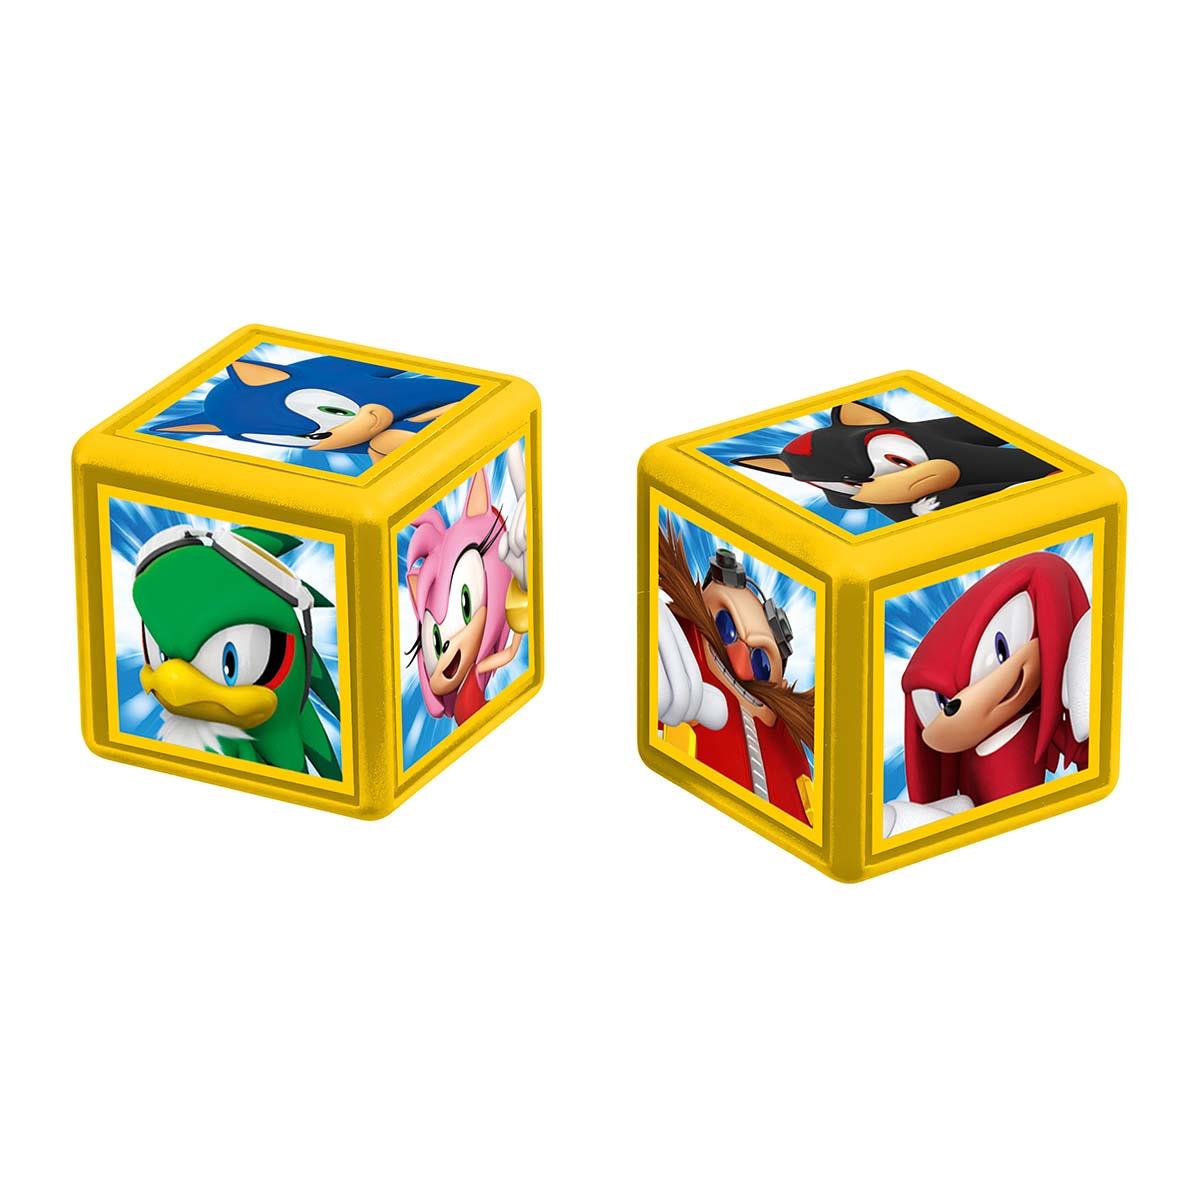 Sonic the Hedgehog Top Trumps Match - The Crazy Cube Game